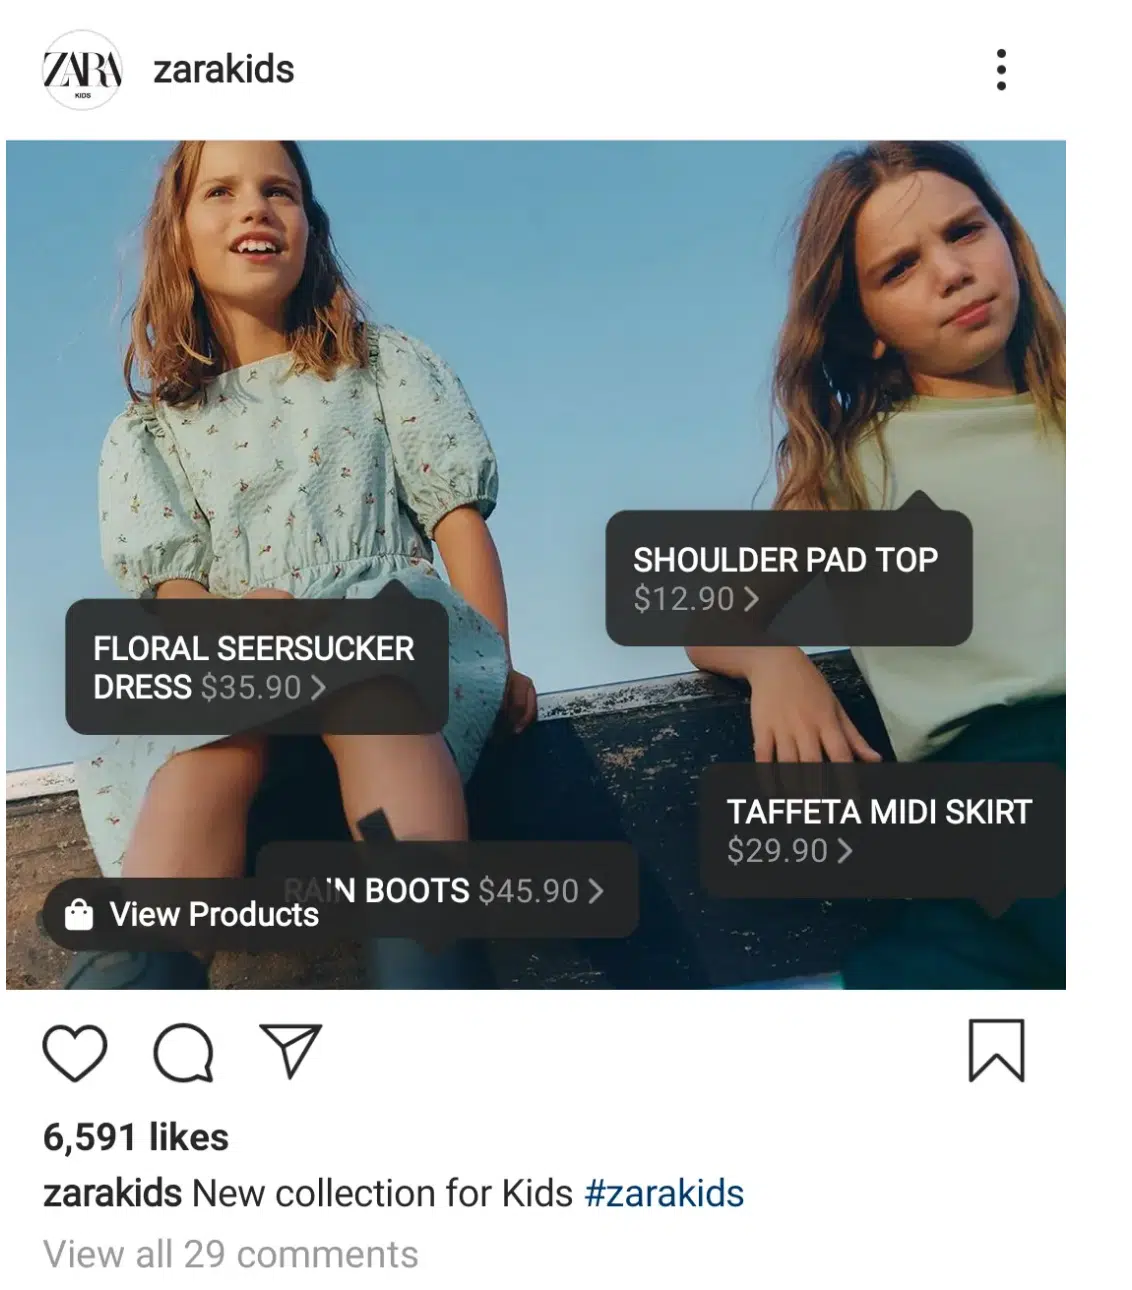 an example of Zara's Instagram shopping with kids clothing options